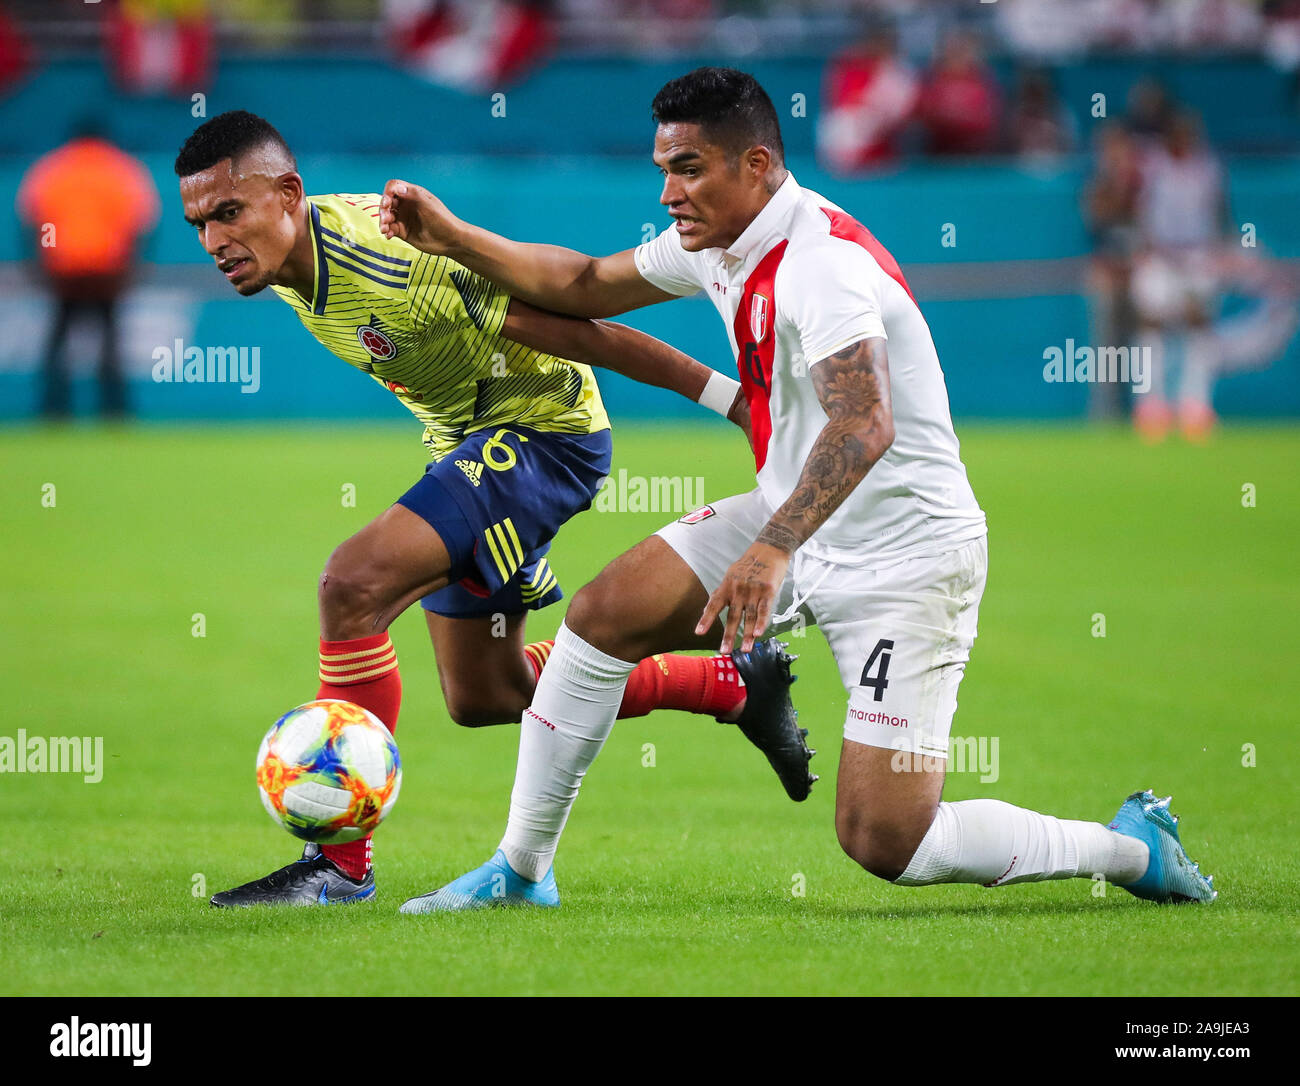 Miami Gardens, Florida, USA. 15th Nov, 2019. Colombia defender William Tesillo (6) tussles for the ball with Peru defender Anderson Santamaria (4) during a friendly soccer match at the Hard Rock Stadium in Miami Gardens, Florida. Credit: Mario Houben/ZUMA Wire/Alamy Live News Stock Photo